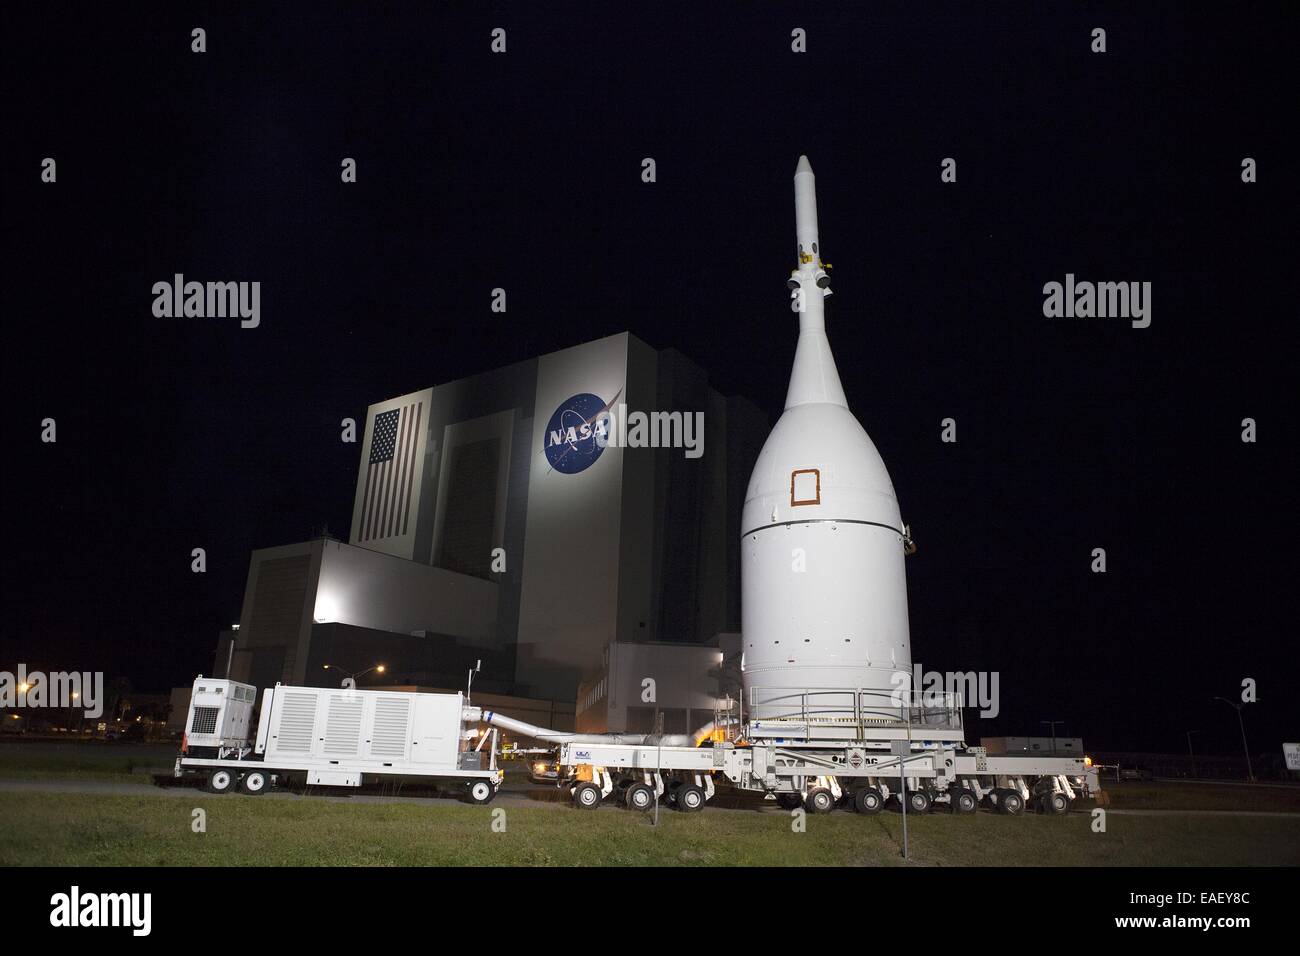 NASA's Orion spacecraft is moved to the launch pad where it will be mounted atop a Delta IV Heavy rocket at NASA's Kennedy Space Center November 12, 2014 in Cape Canaveral, Florida. The first unpiloted flight test of Orion is scheduled to launch December 4, 2014. Stock Photo